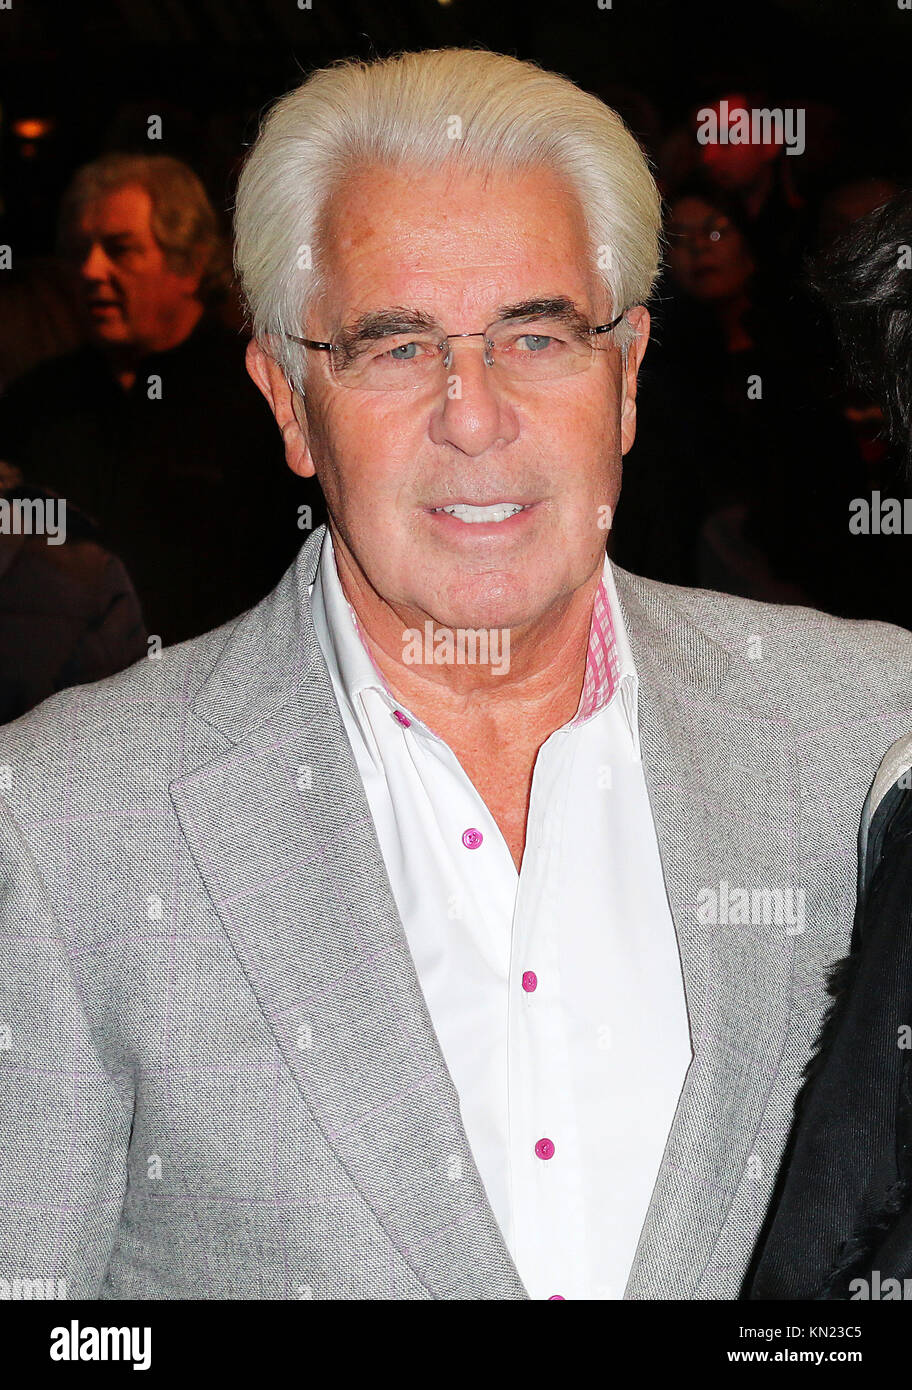 Max Clifford - Disgraced celebrity publicist  has died in hospital, aged 74, after collapsing in prison, 10 December 2017, Photo by Richard Goldschmidt Stock Photo